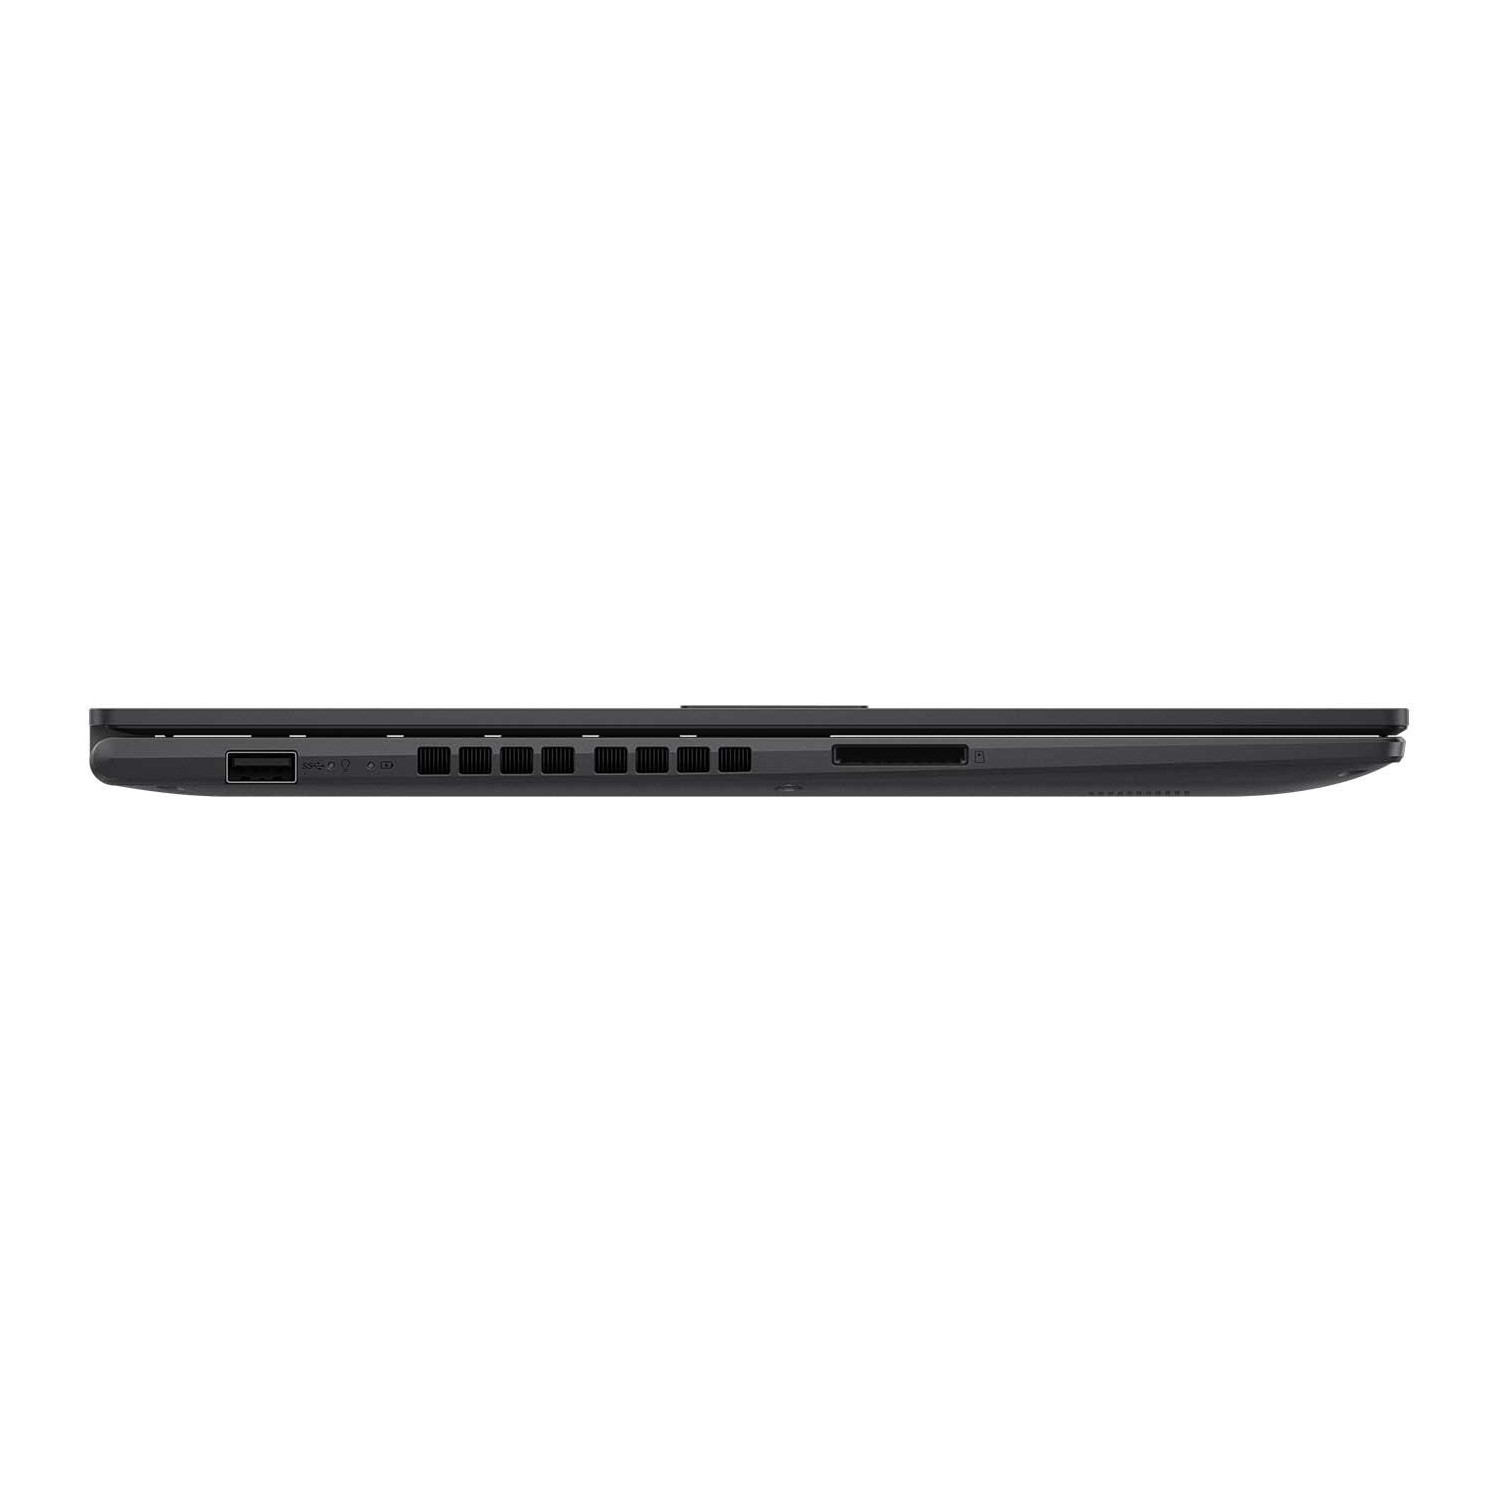 Asus%20Vivobook%2016X%20K3605ZC-N1013W%20I5-12450H%208Gb%20512Gb%20Ssd%204Gb%20RTX3050%2016’’%20FHD%20Win11%20Home%20Notebook